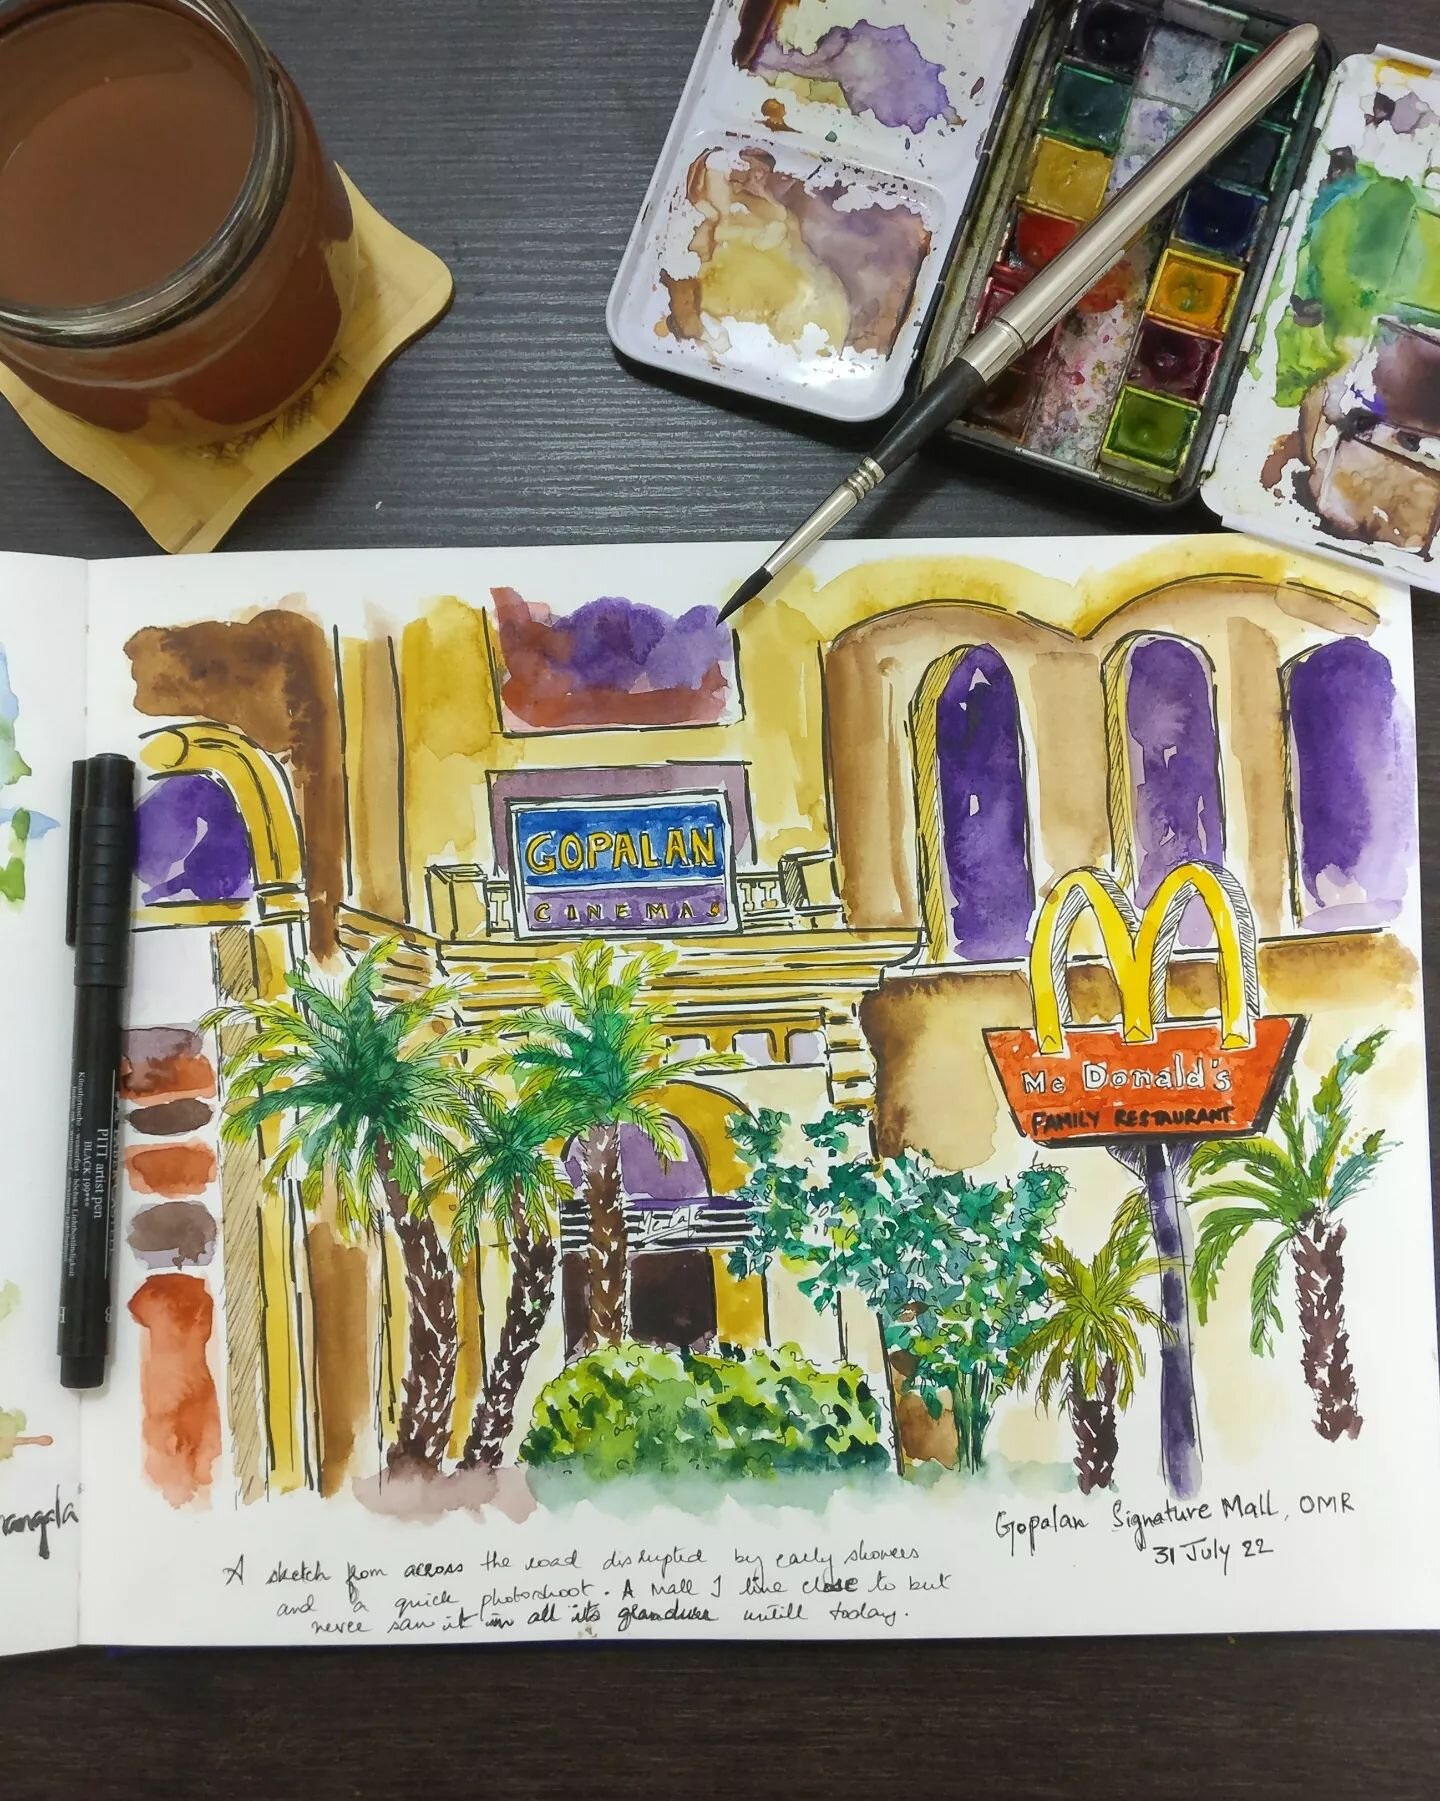 Finishing off an urban sketch that l started that was disrupted by the rains. I've lived close to this place for nearly three years now, walked past it, drove past it and even shopped in it. But nothing compares to pausing to sketch it. 
.
The grande